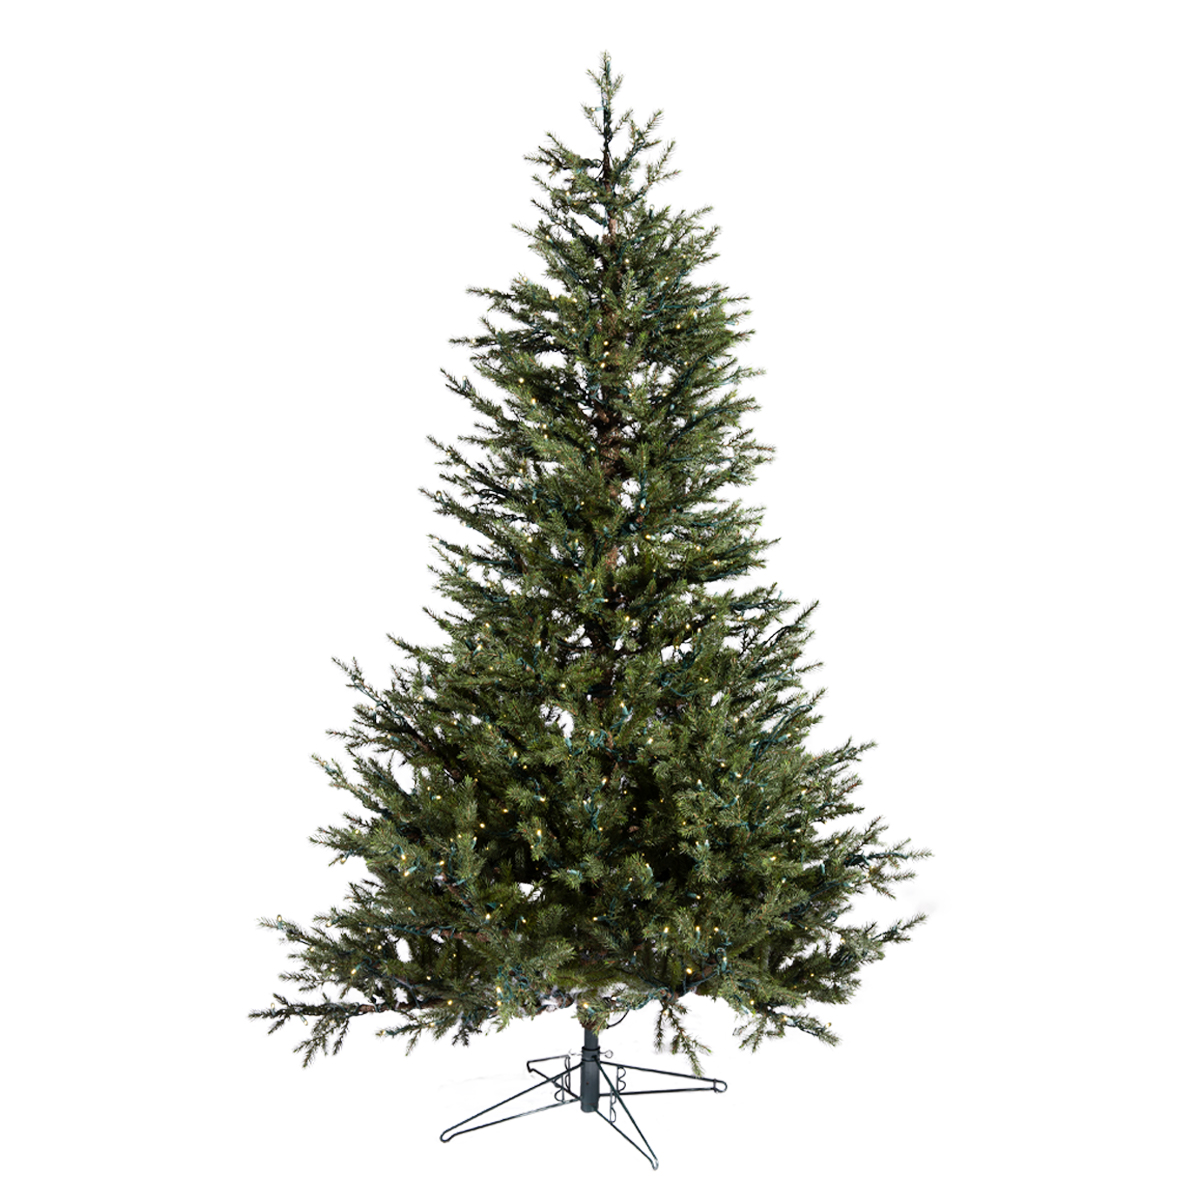 Hemlock Deluxe Christmas Tree - Warm White Glow LEDs - Twinkle Effect - One-Plug Power Supply - 7.5ft Tall